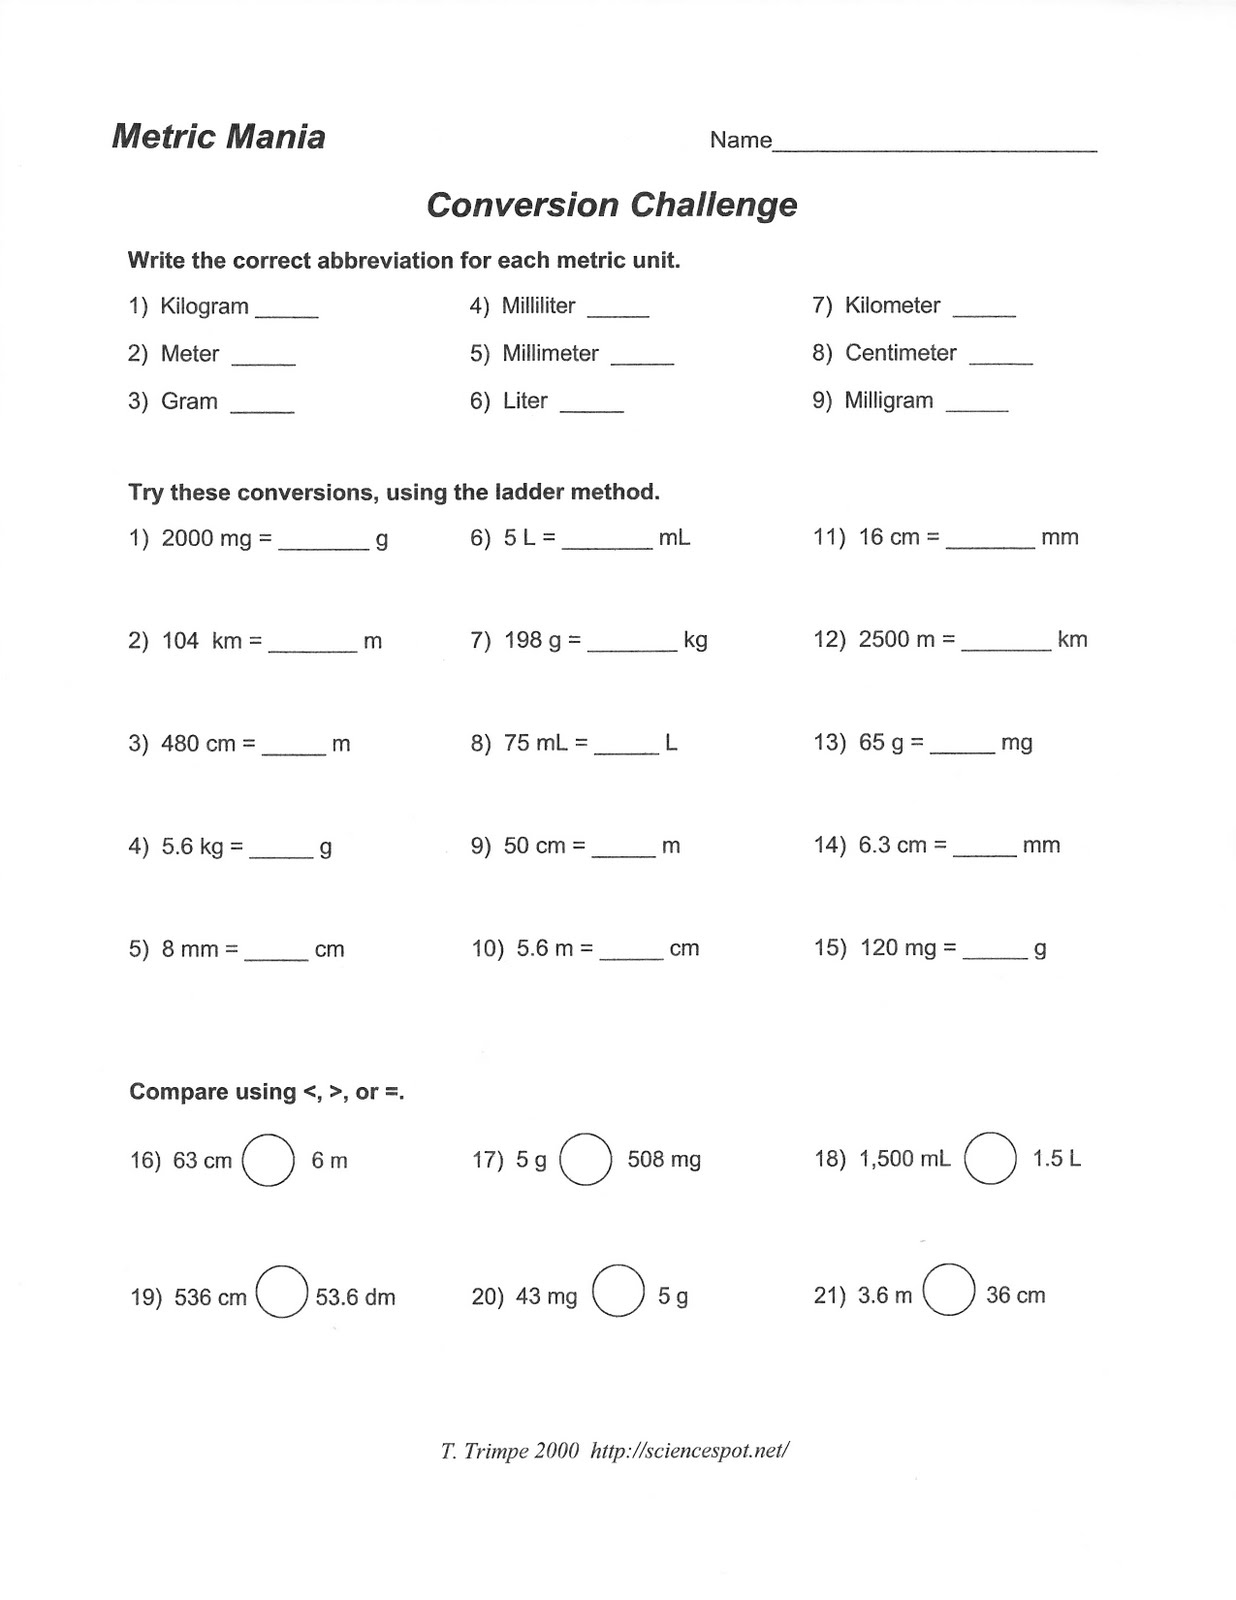 Science Class: Metric system conversion worksheet